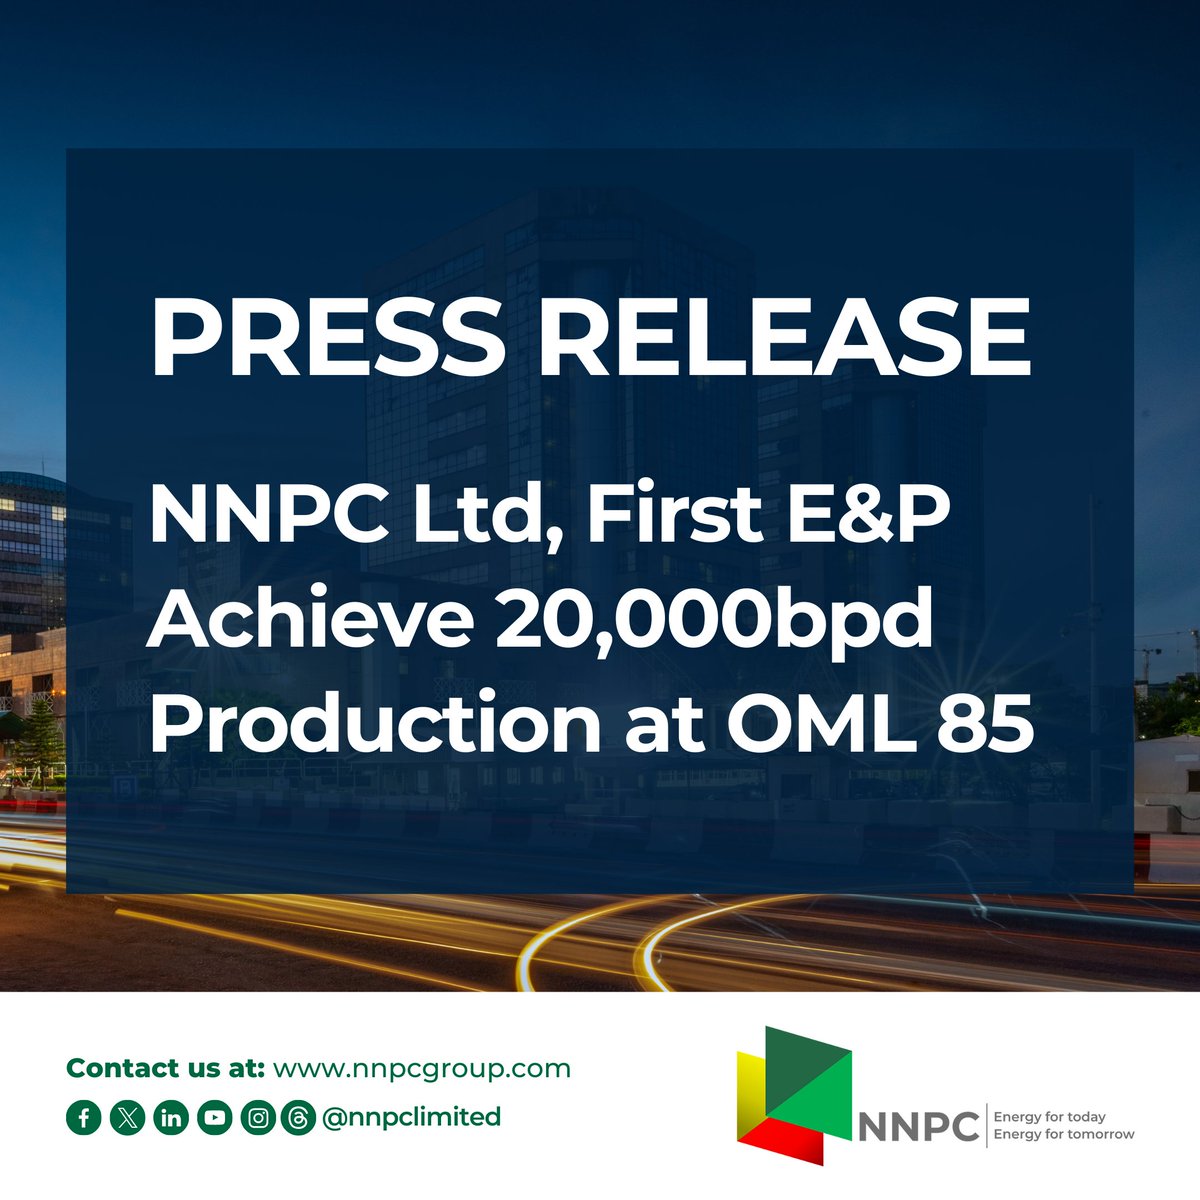 PRESS RELEASE NNPC Ltd, First E&P Achieve 20,000bpd Production at OML 85 The Nigerian National Petroleum Company Limited (NNPC Ltd.) and its Joint Venture partner in OML 85, First Exploration and Petroleum Development Company Limited (First E&P), have commenced oil production